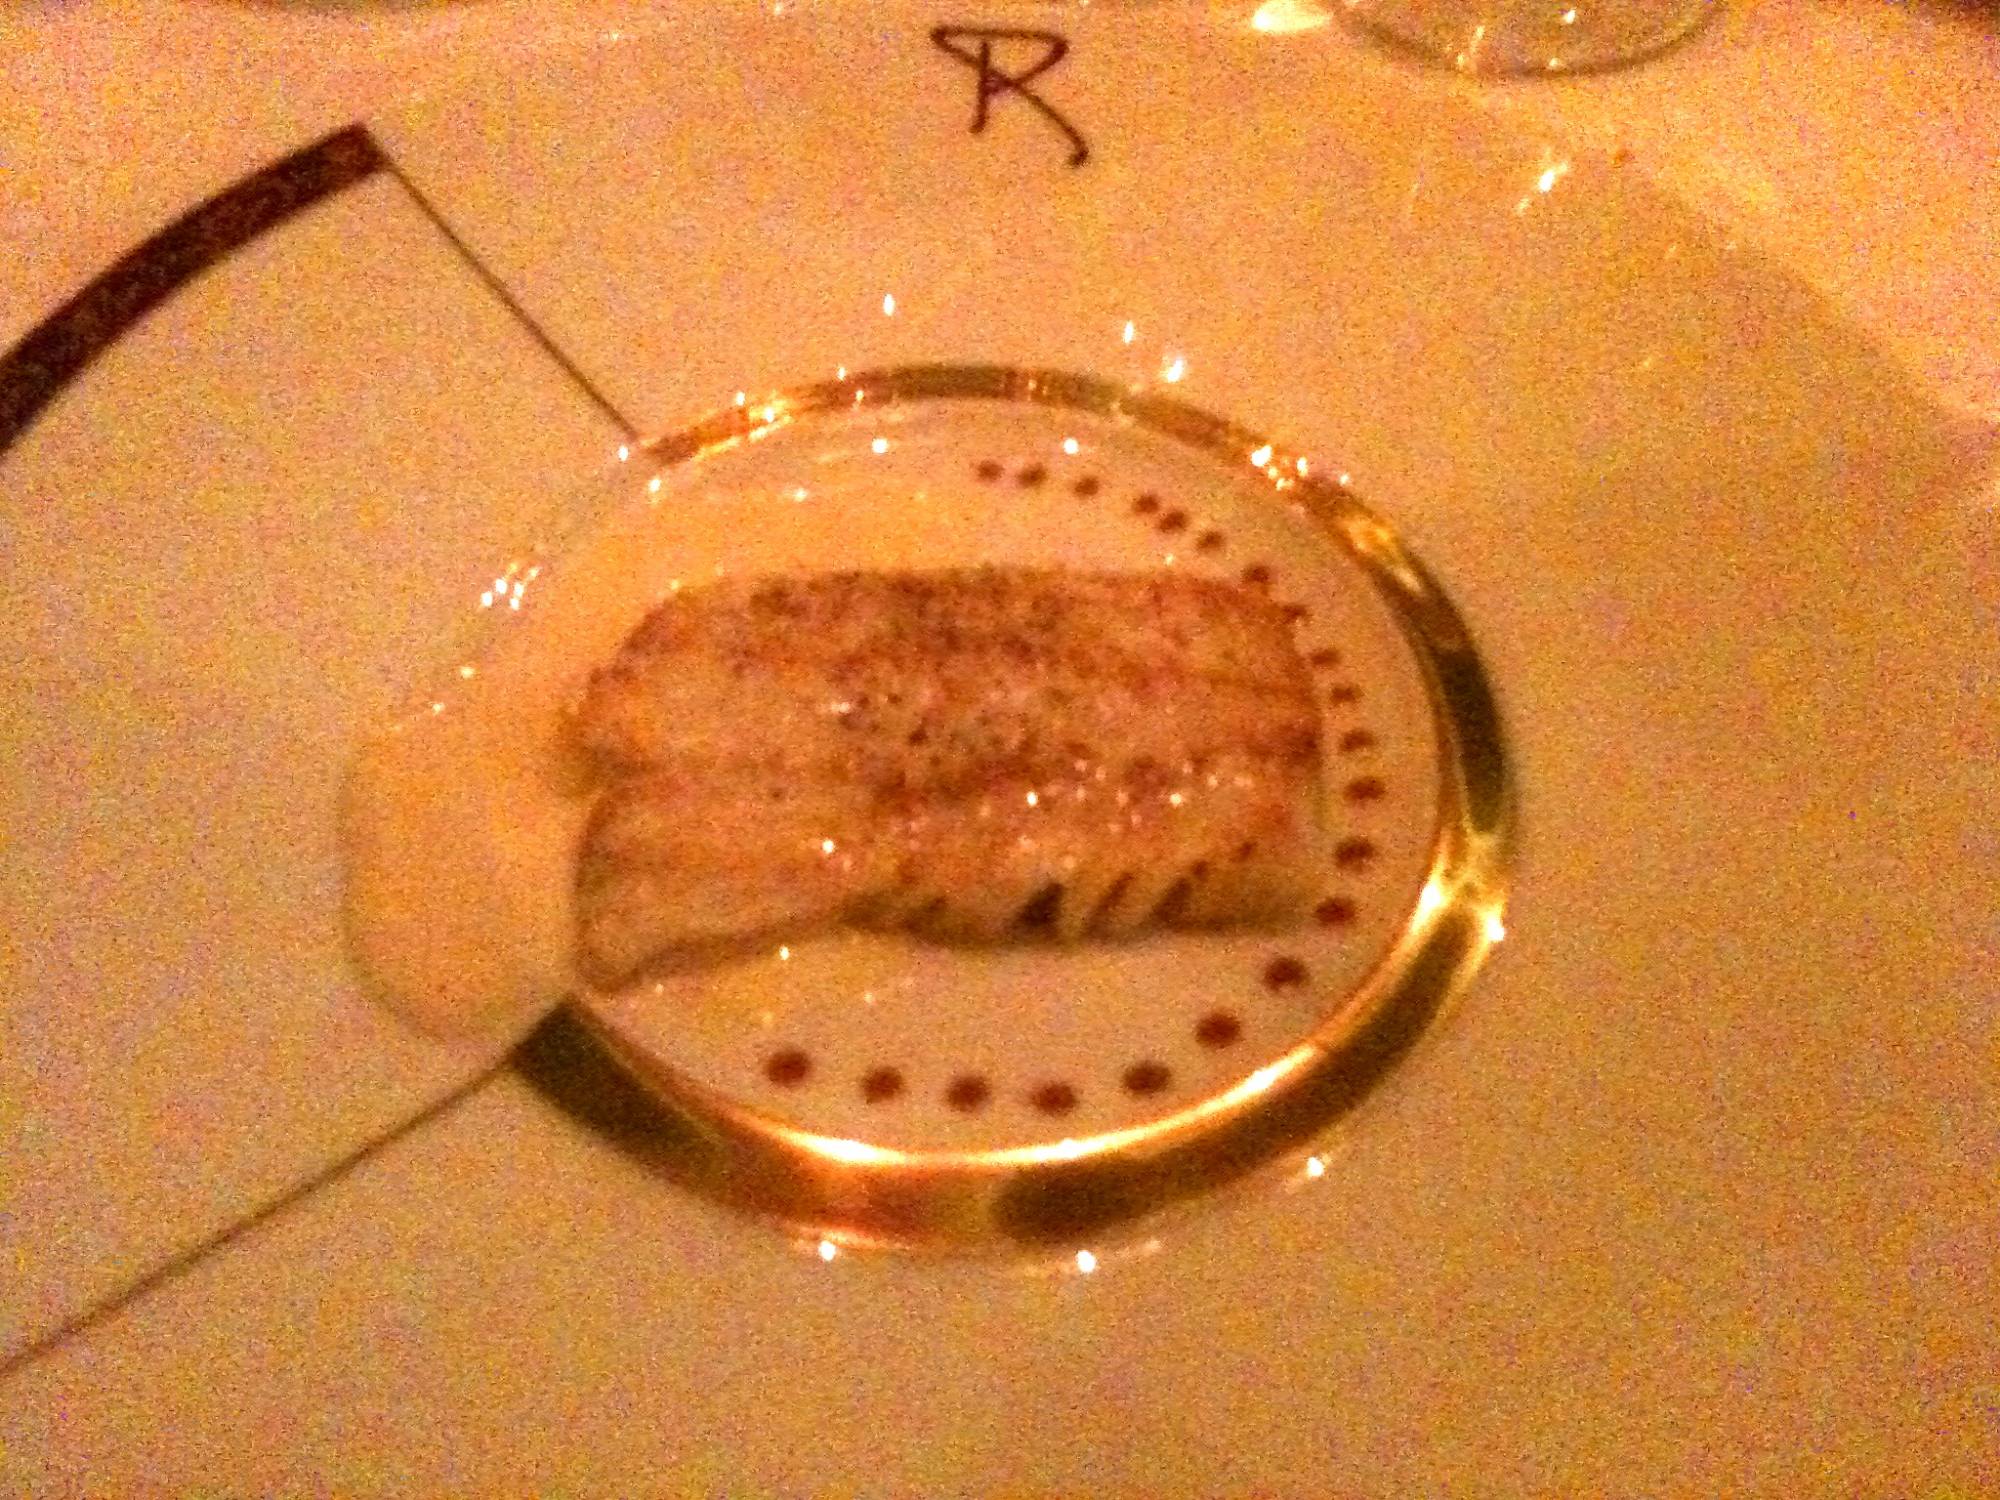 Disney Dream - Turbot Cotier at Remy